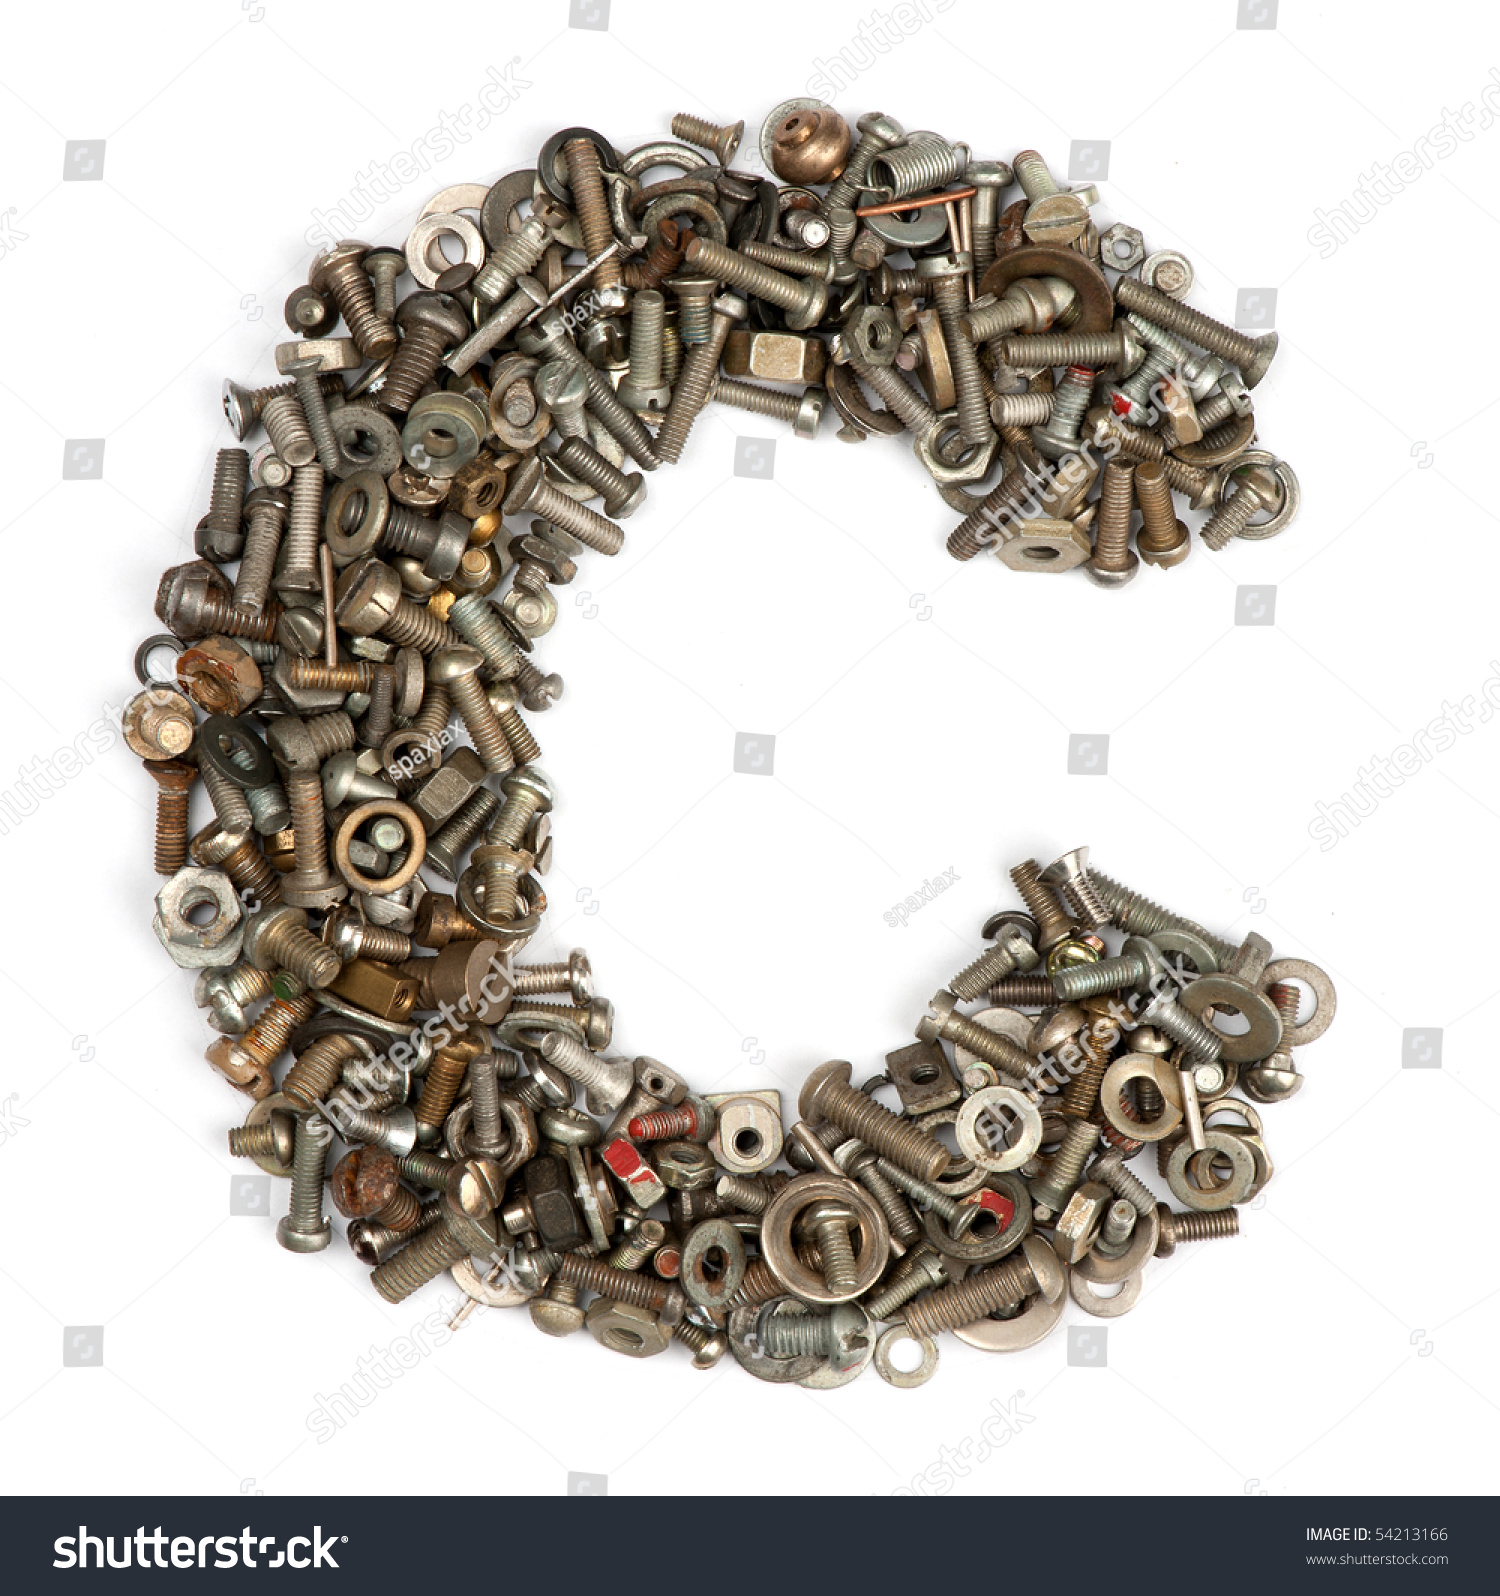 alphabet made of bolts - The letter c #54213166